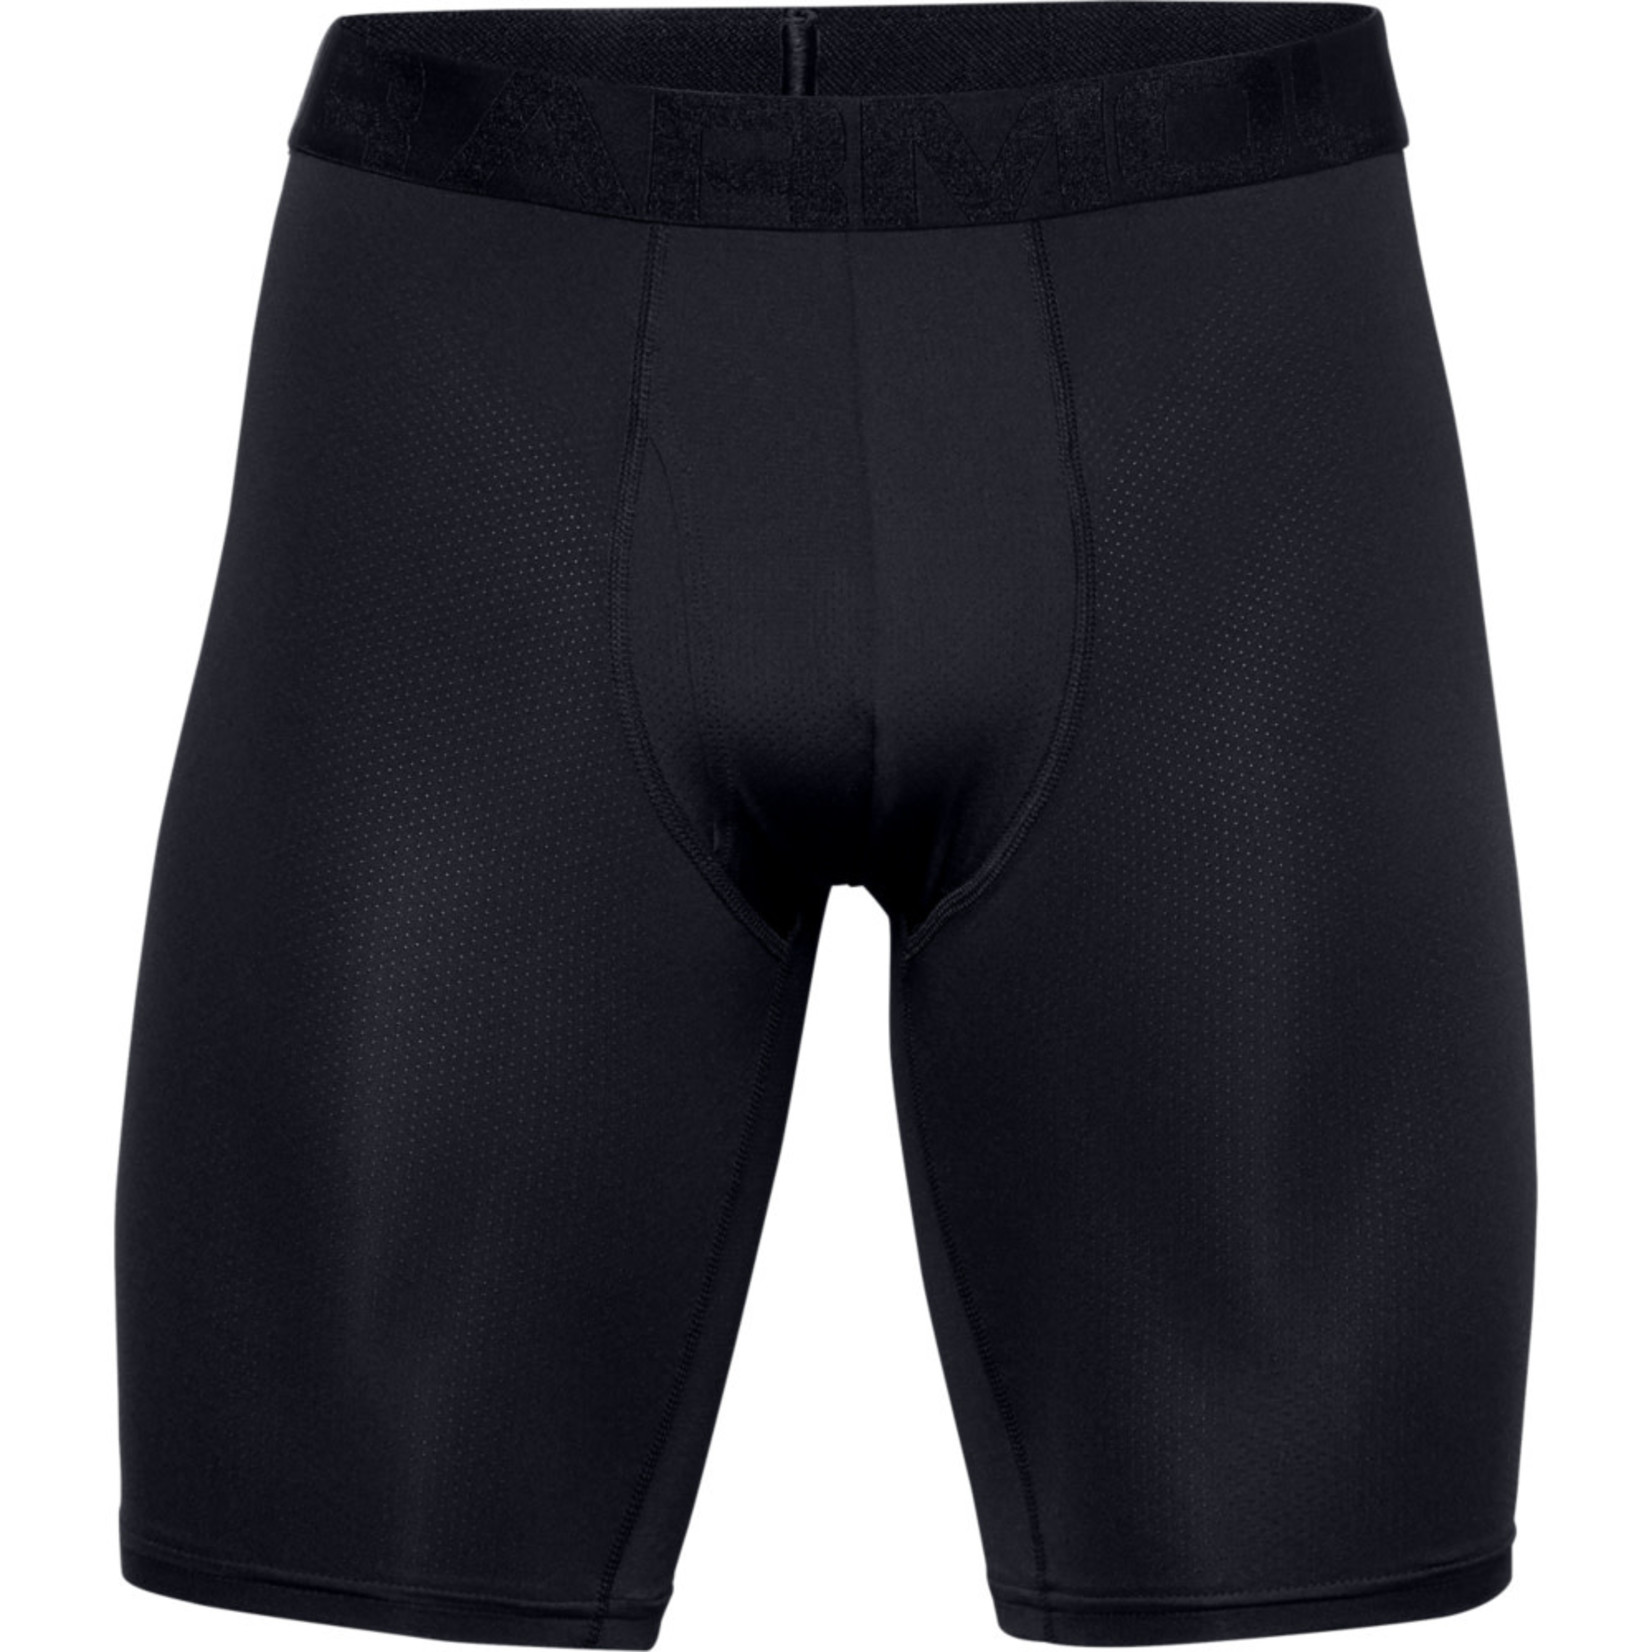 Under Armour UA Tech Mesh 9in Boxers 2 Pack-BLK